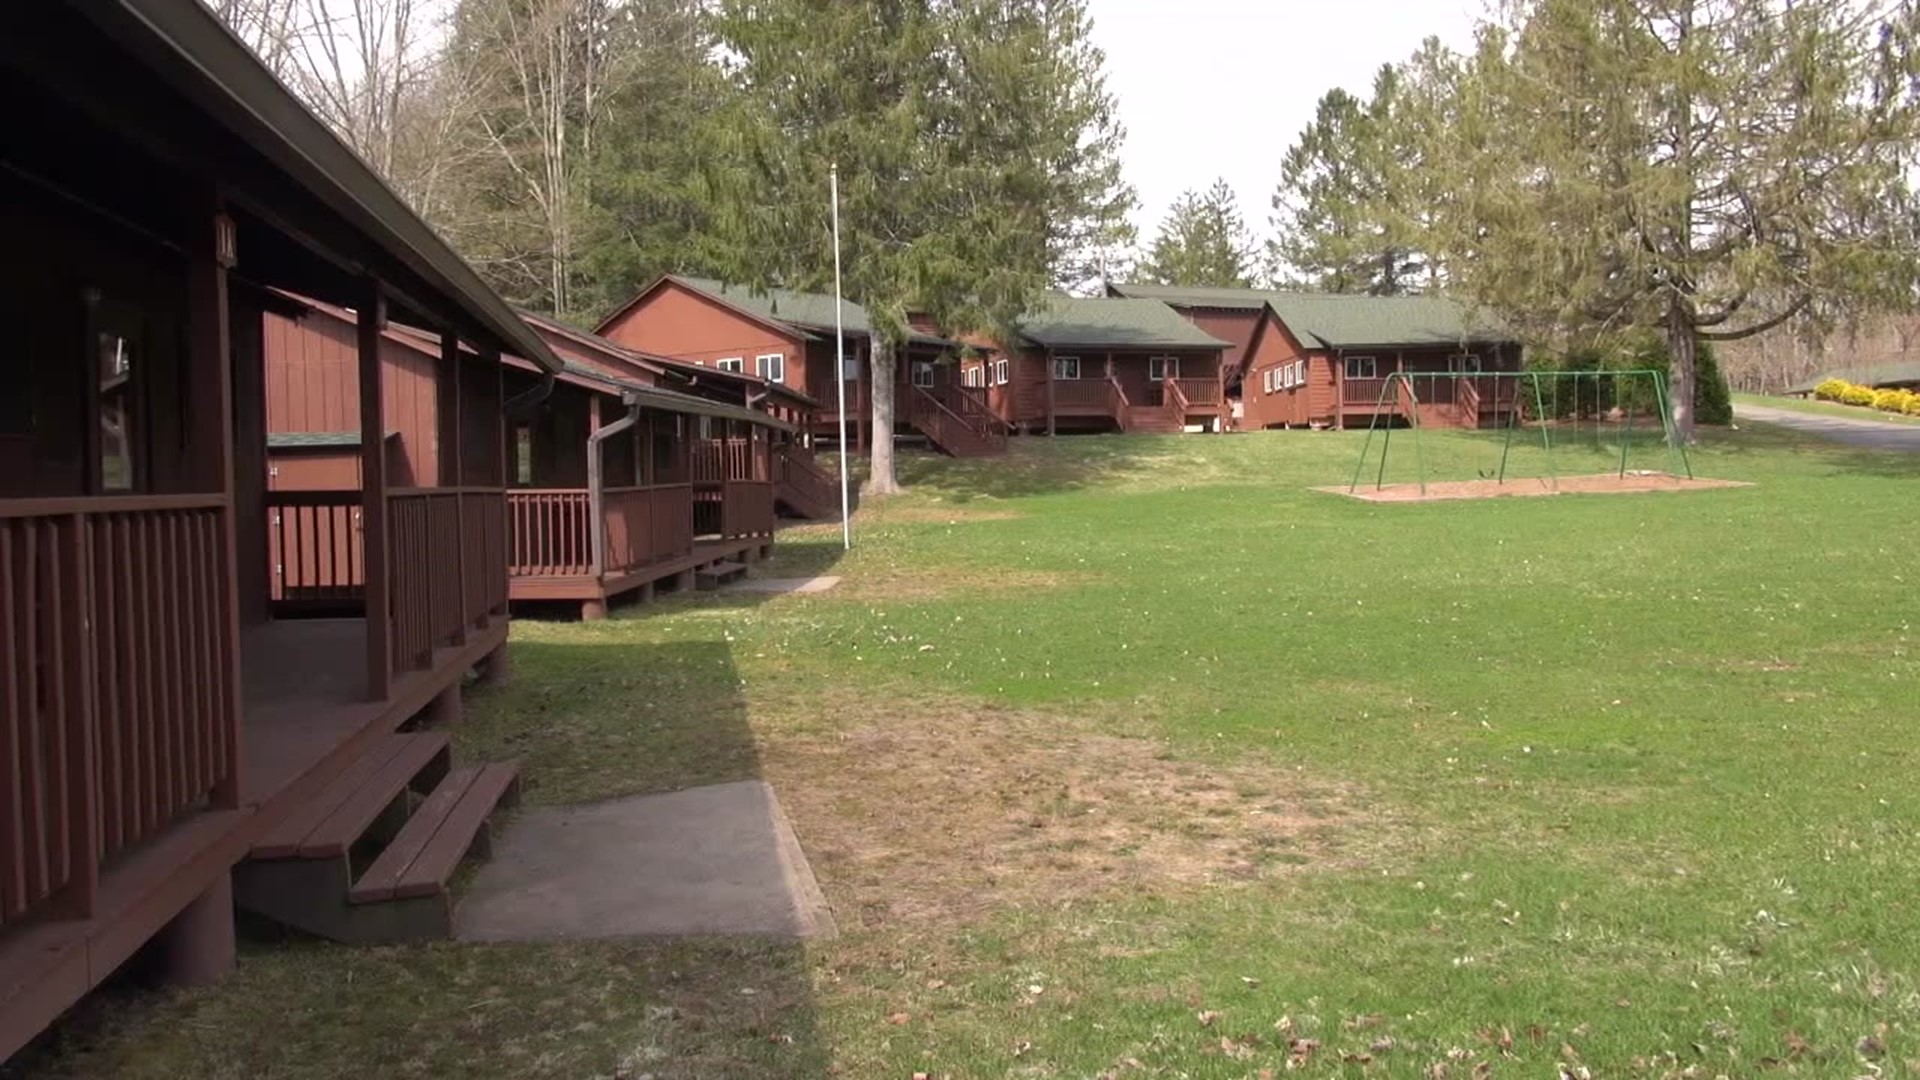 Summer camps will come alive again this year after the pandemic kept the cabins closed in 2020.